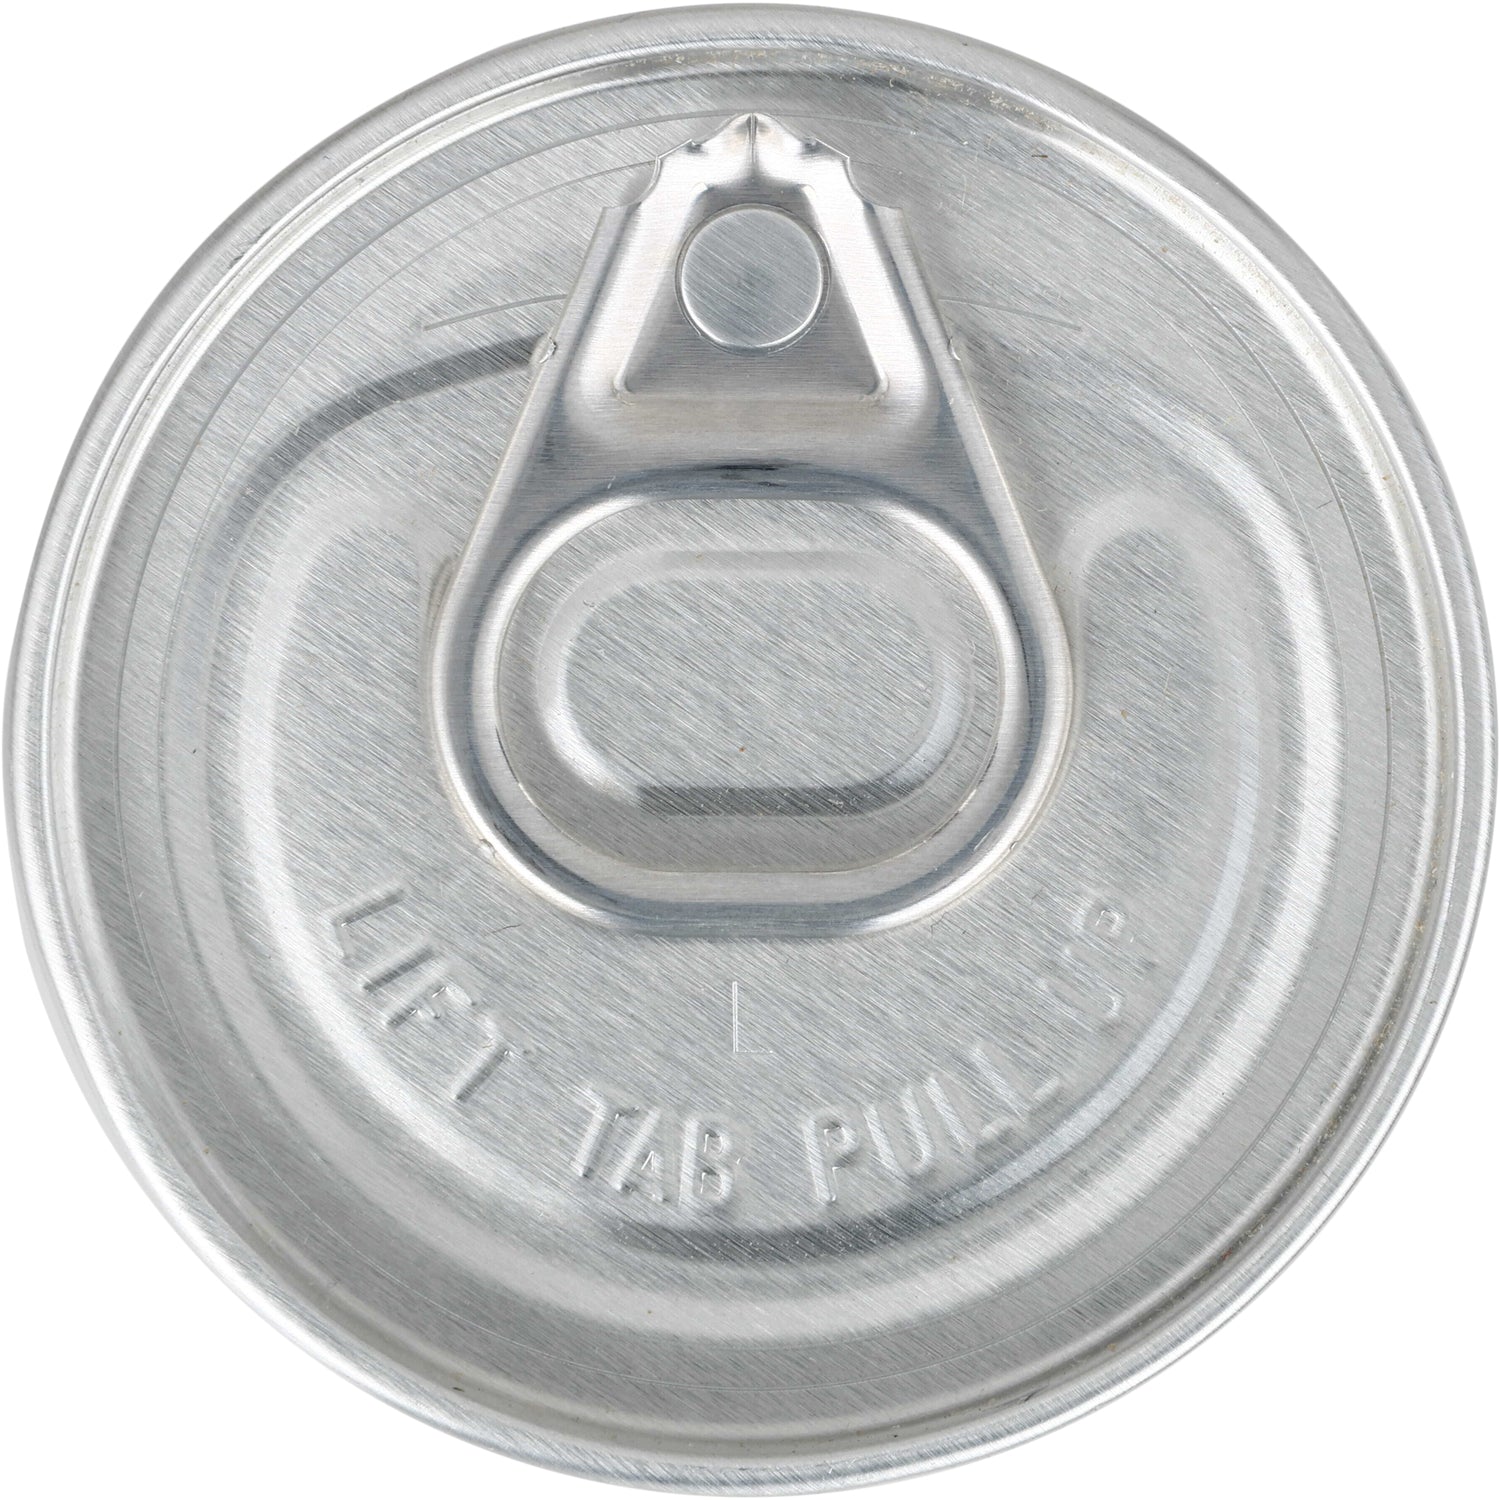 Metal pull tab on white background with pressed words that read "Lift Tab Pull Up"